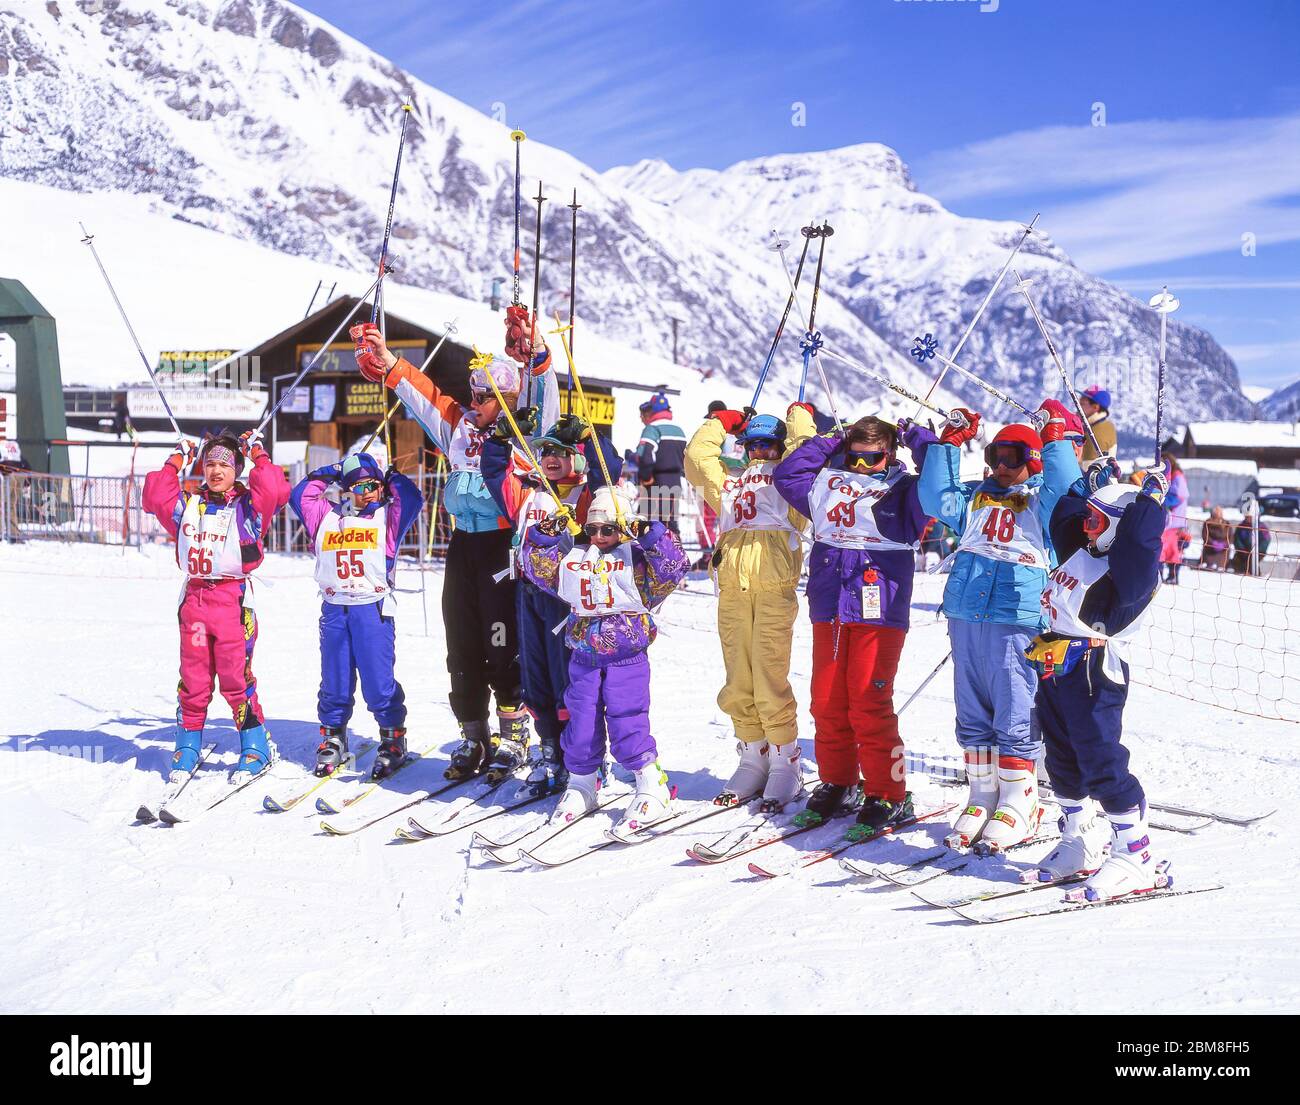 Ski instructor with children's class on lower slopes, Livigno, Alta Valtellina, Lombardy, Italy Stock Photo